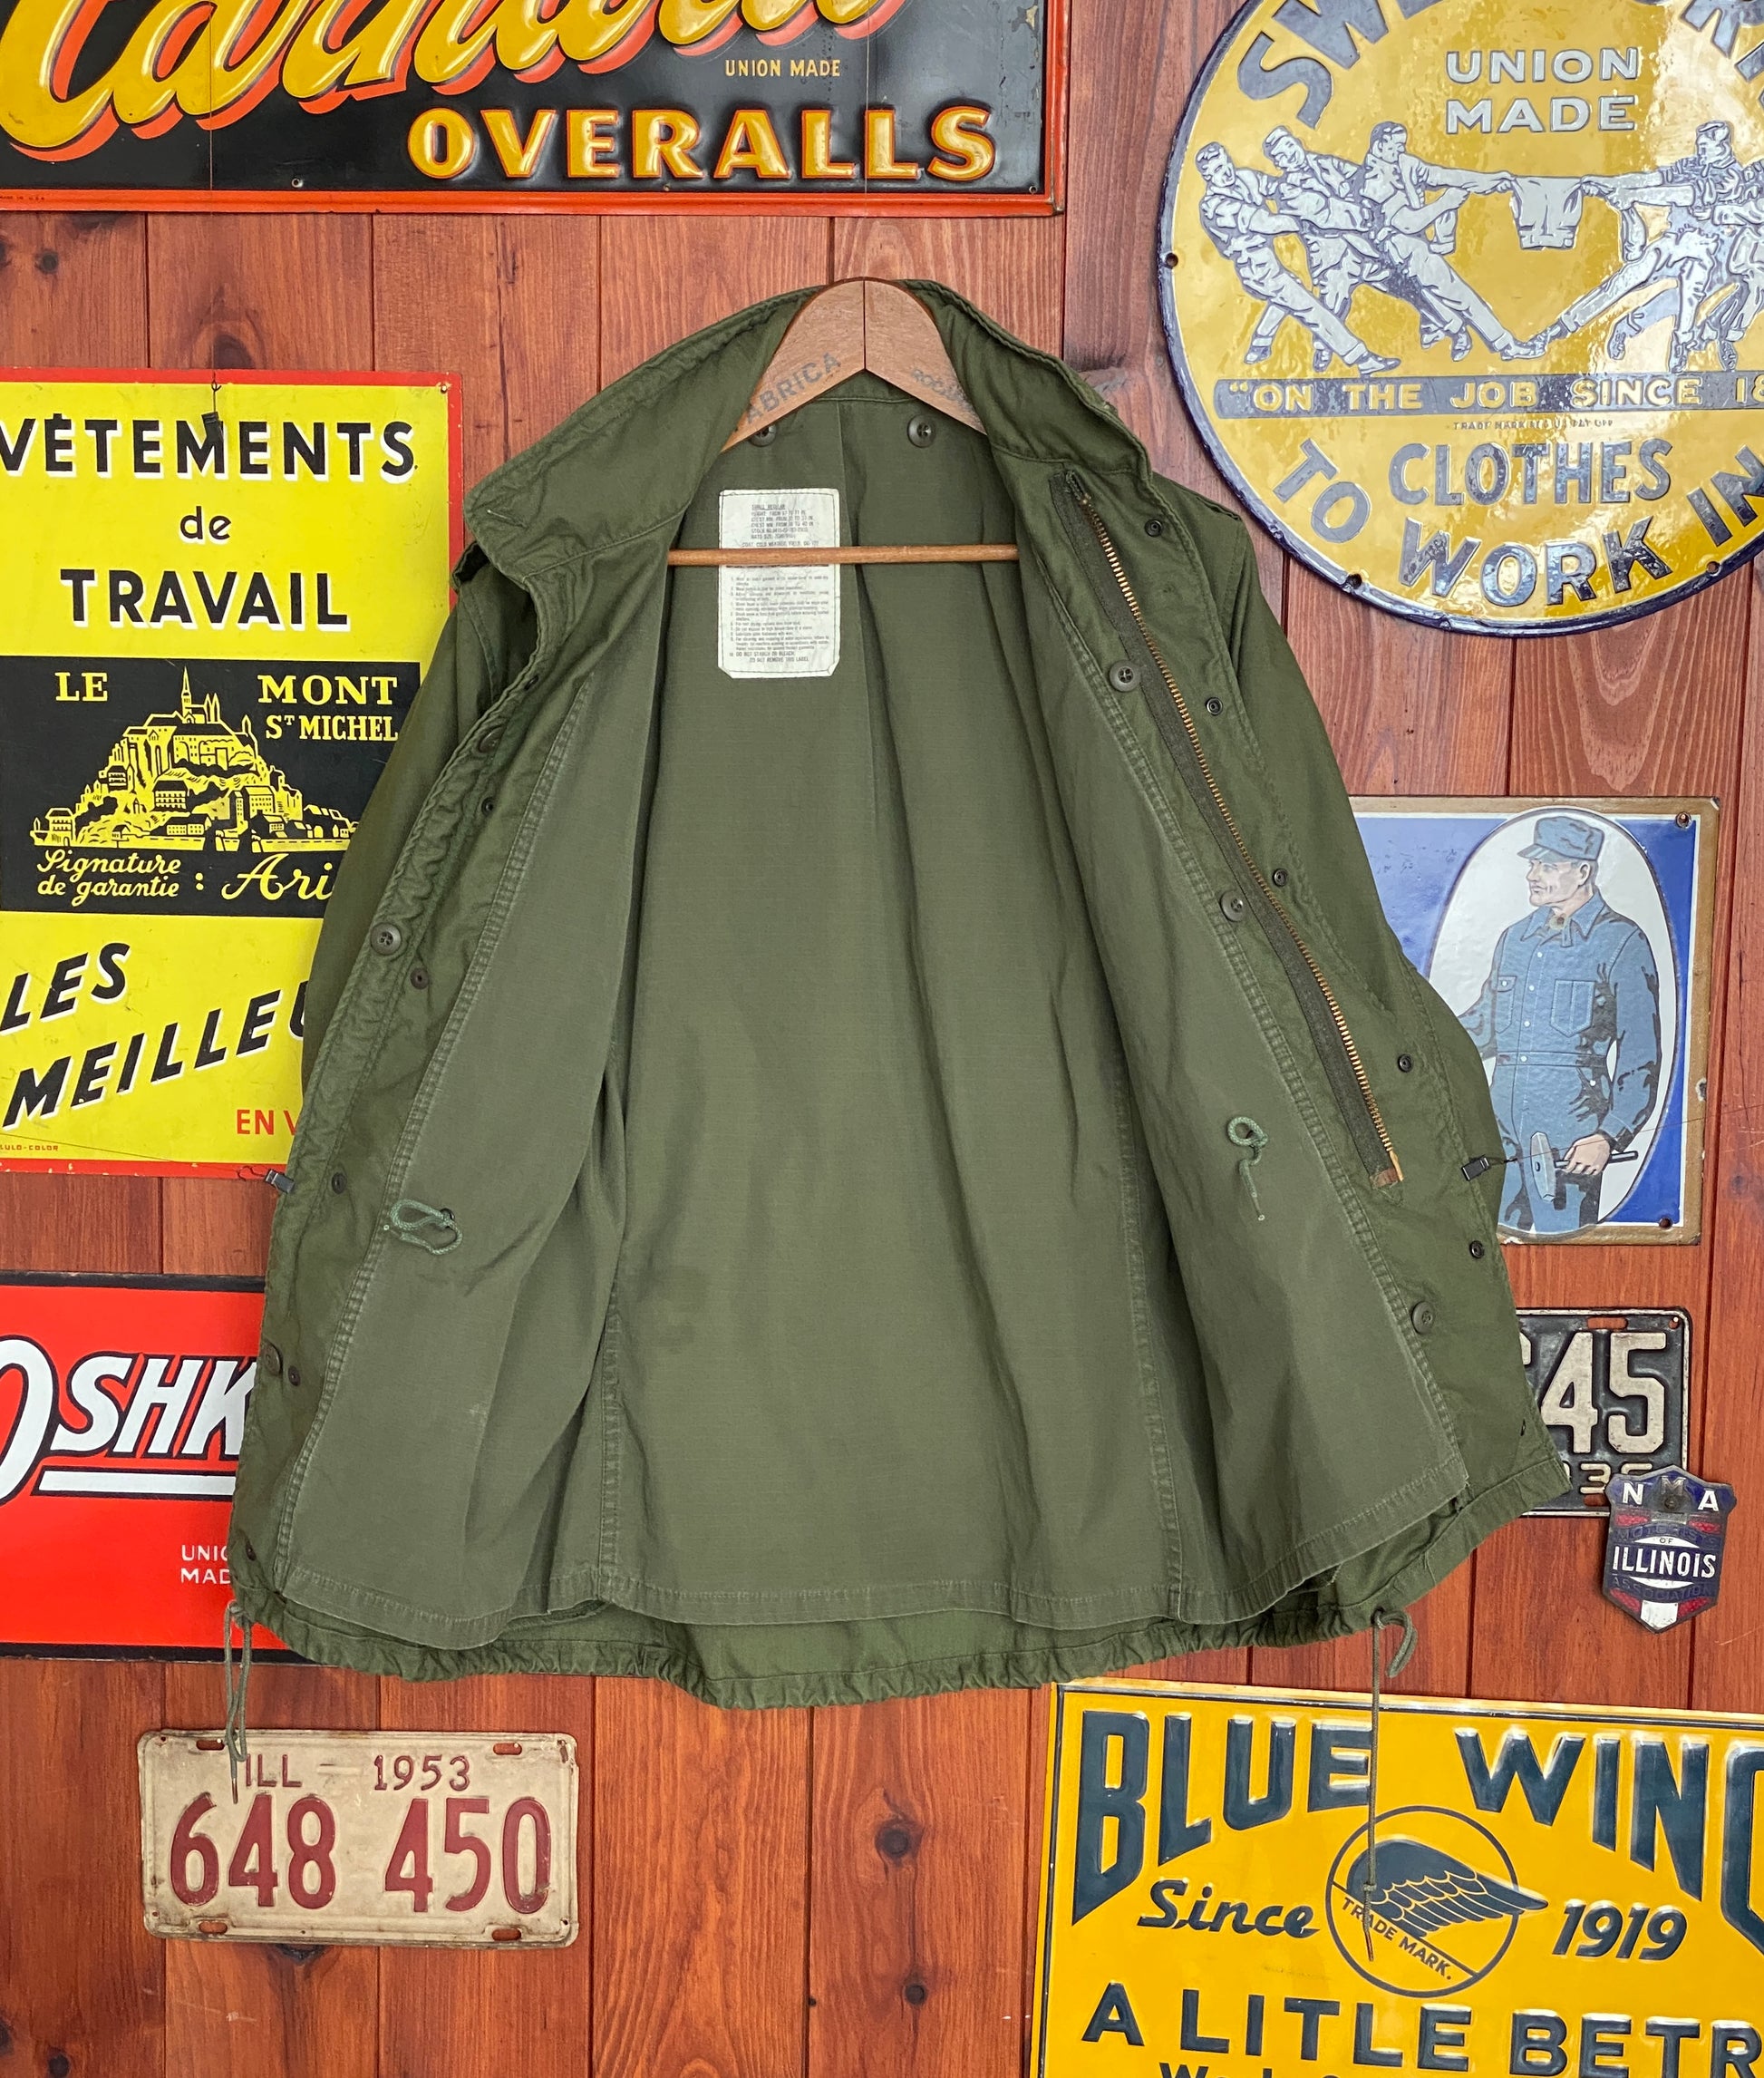 Authentic 1981 US Army Vintage M-65 Field Jacket by Alpha Industries in Olive Green | Classic Military Apparel with Timeless Style and Durability